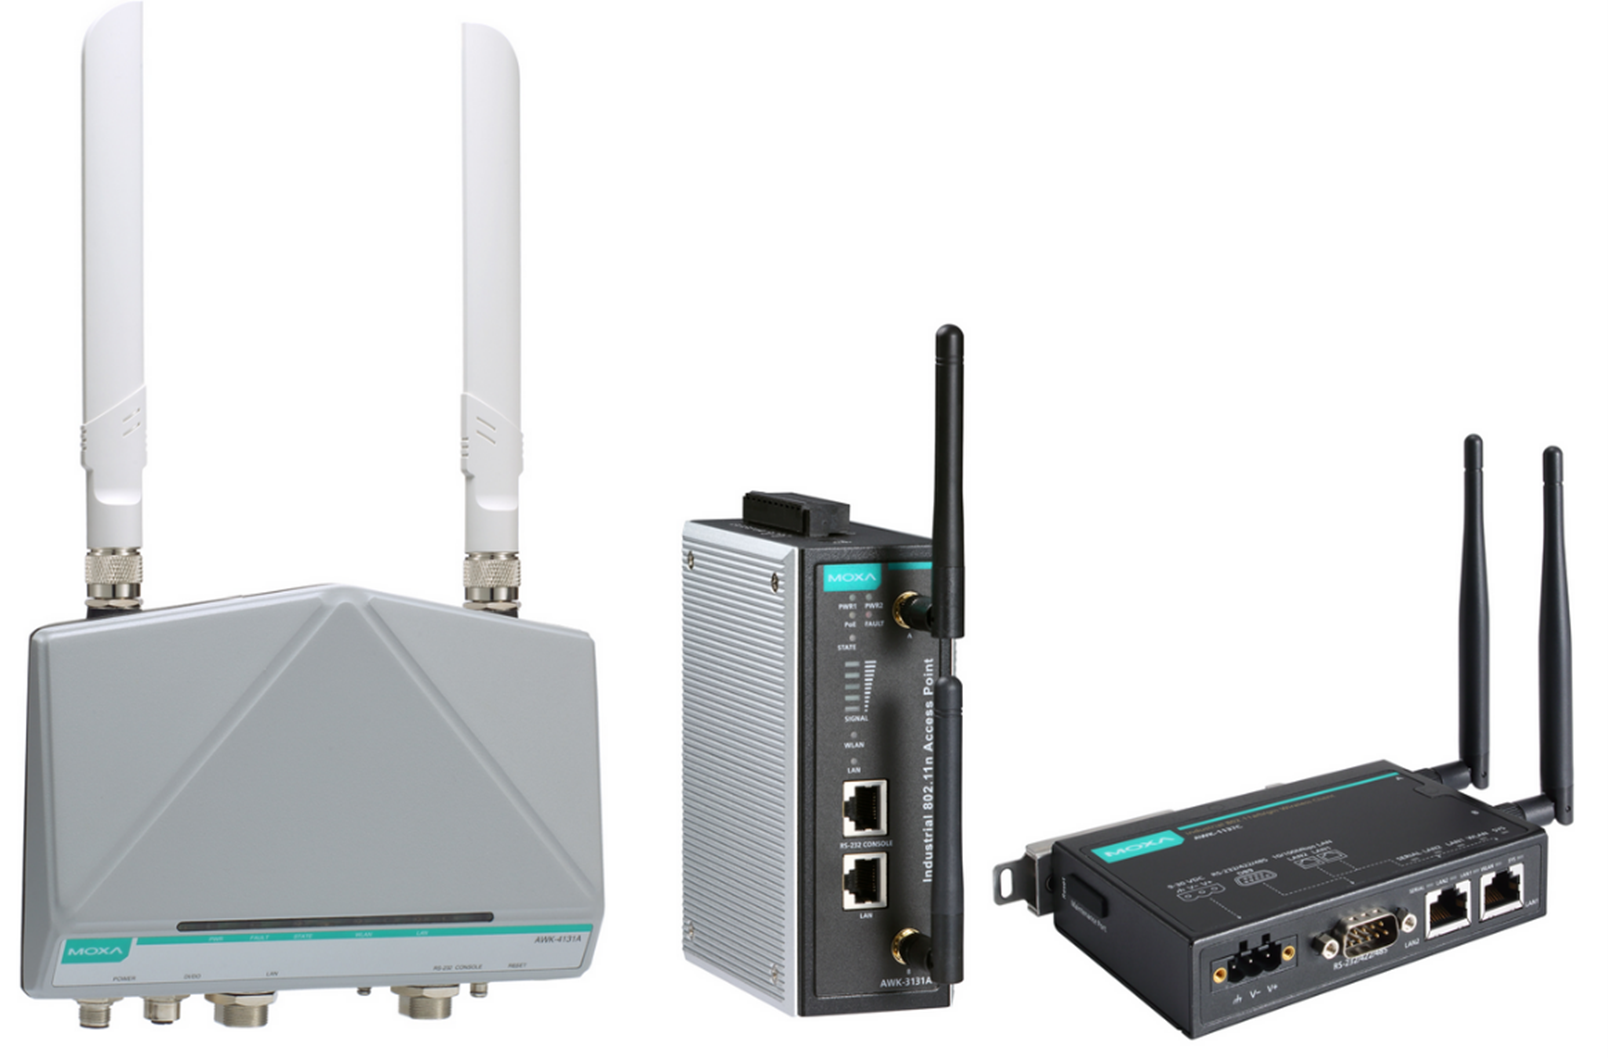 Wi-Fi Access Points and Clients